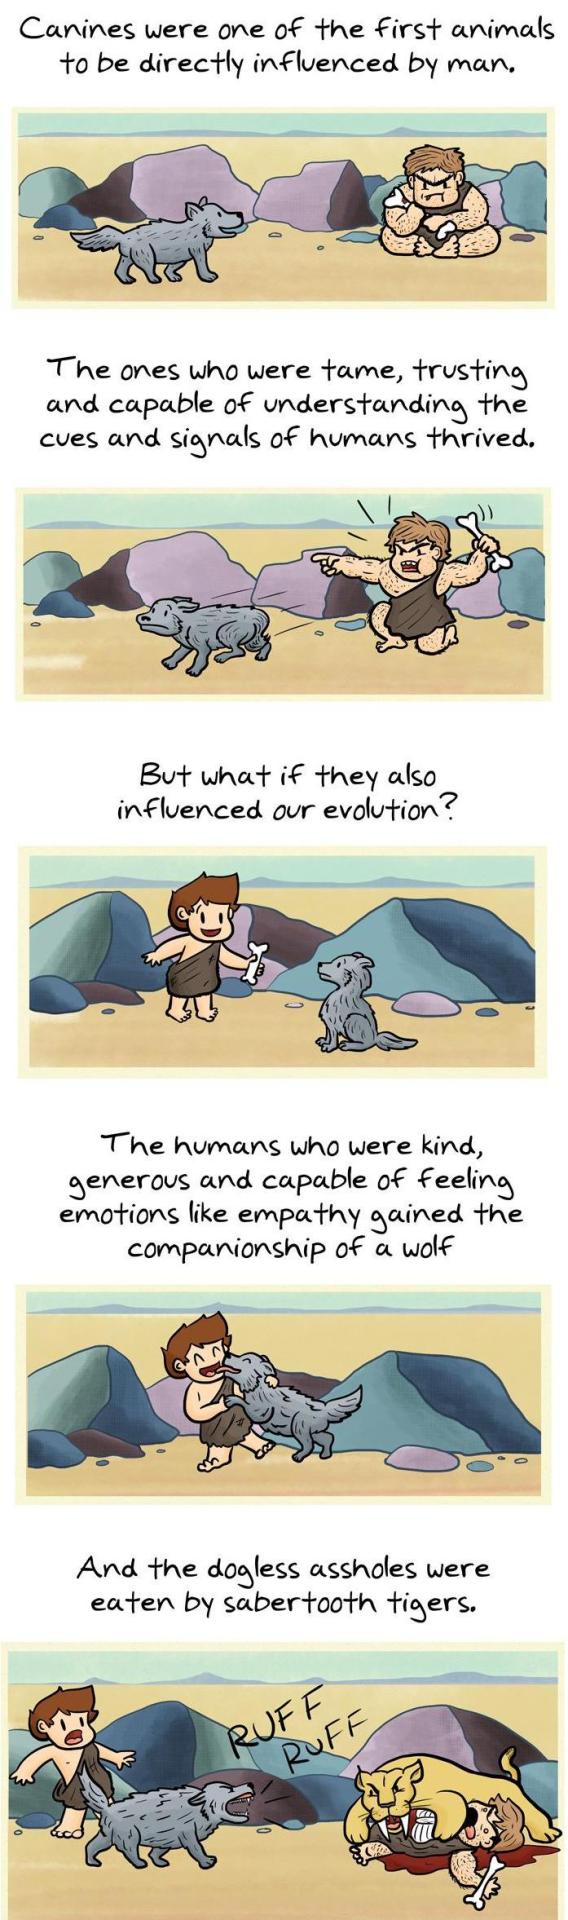 An interesting thing to think about. How much have dogs changed humanity for the